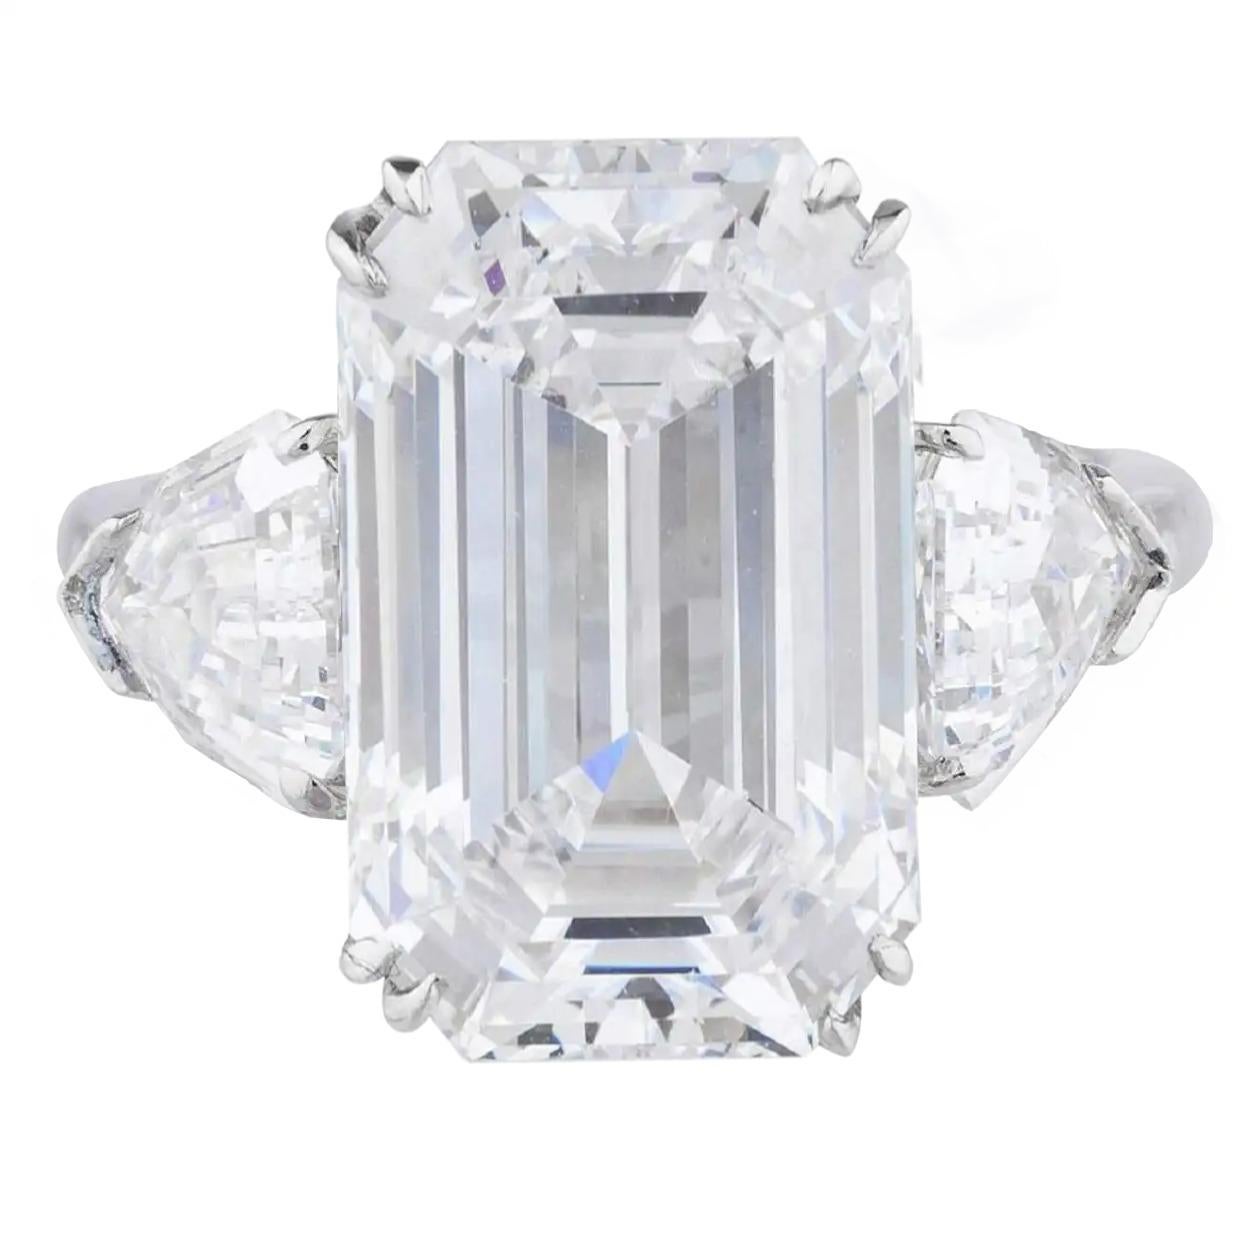 The main stone is an amazing quality Gia Certified 3 Carat Emerald Cut Diamond D Color FLAWLESS Clarity